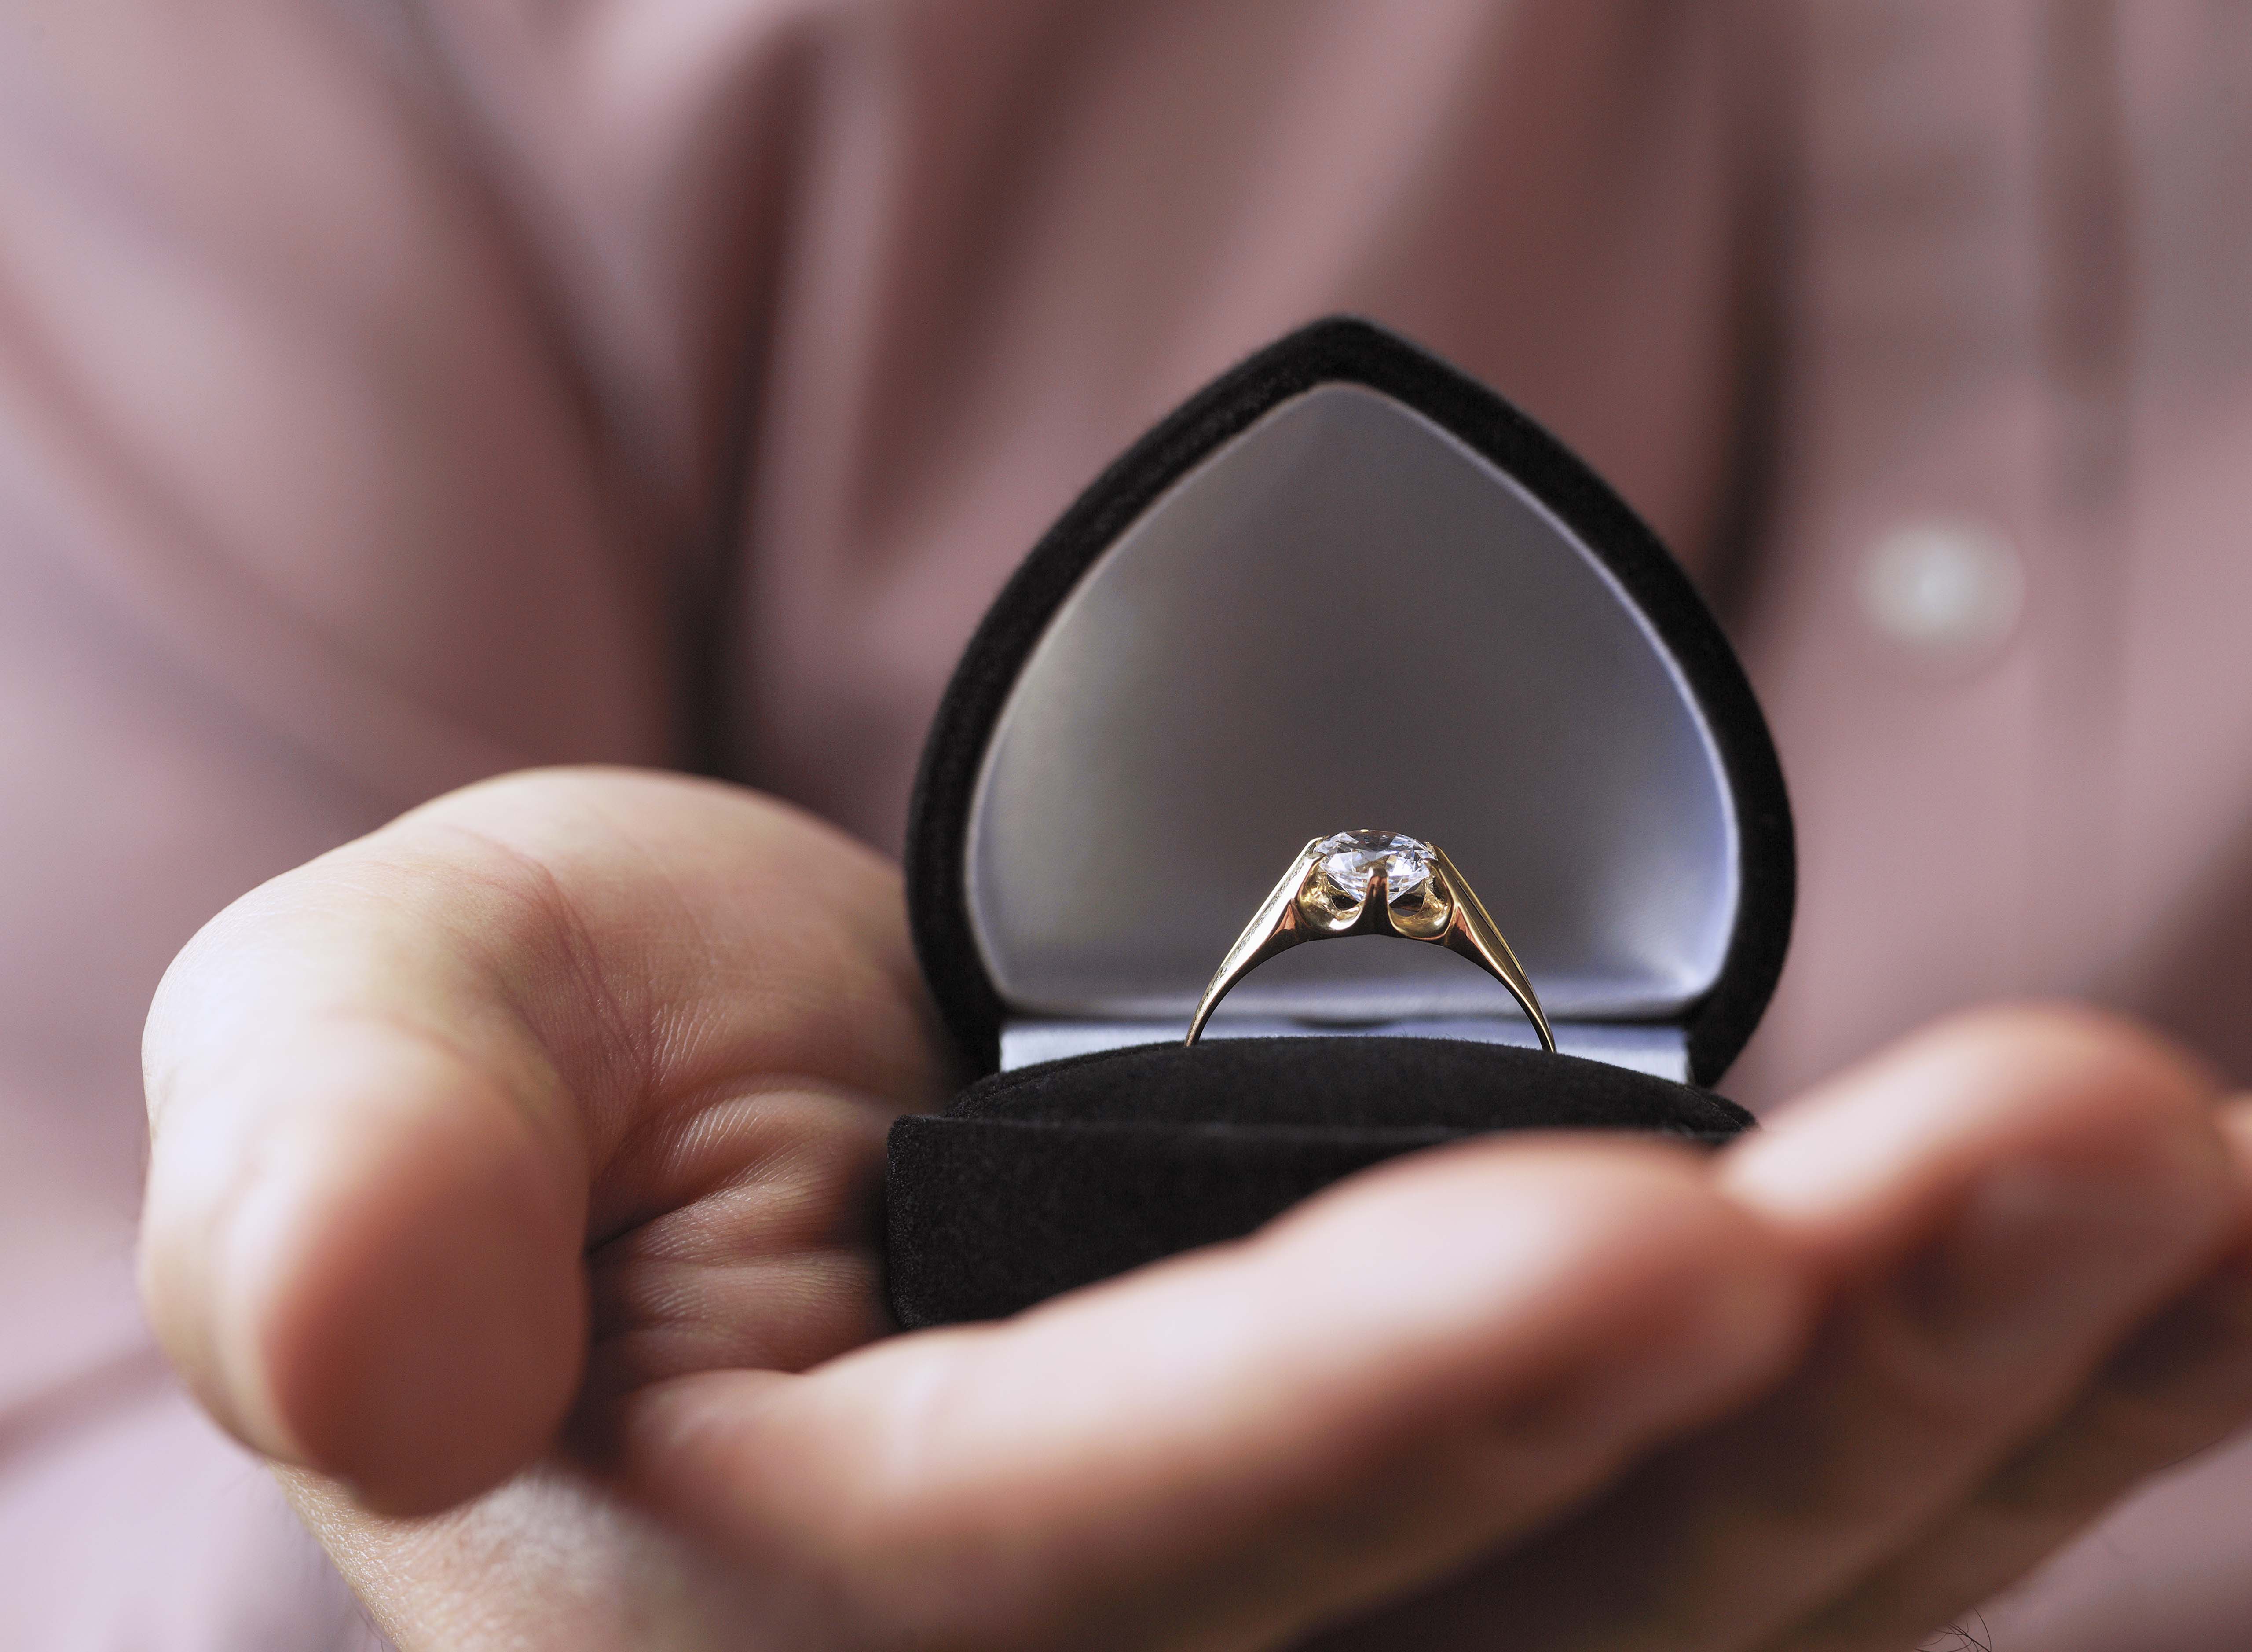 Engagement ring in a heart-shaped box | Source: Getty Images